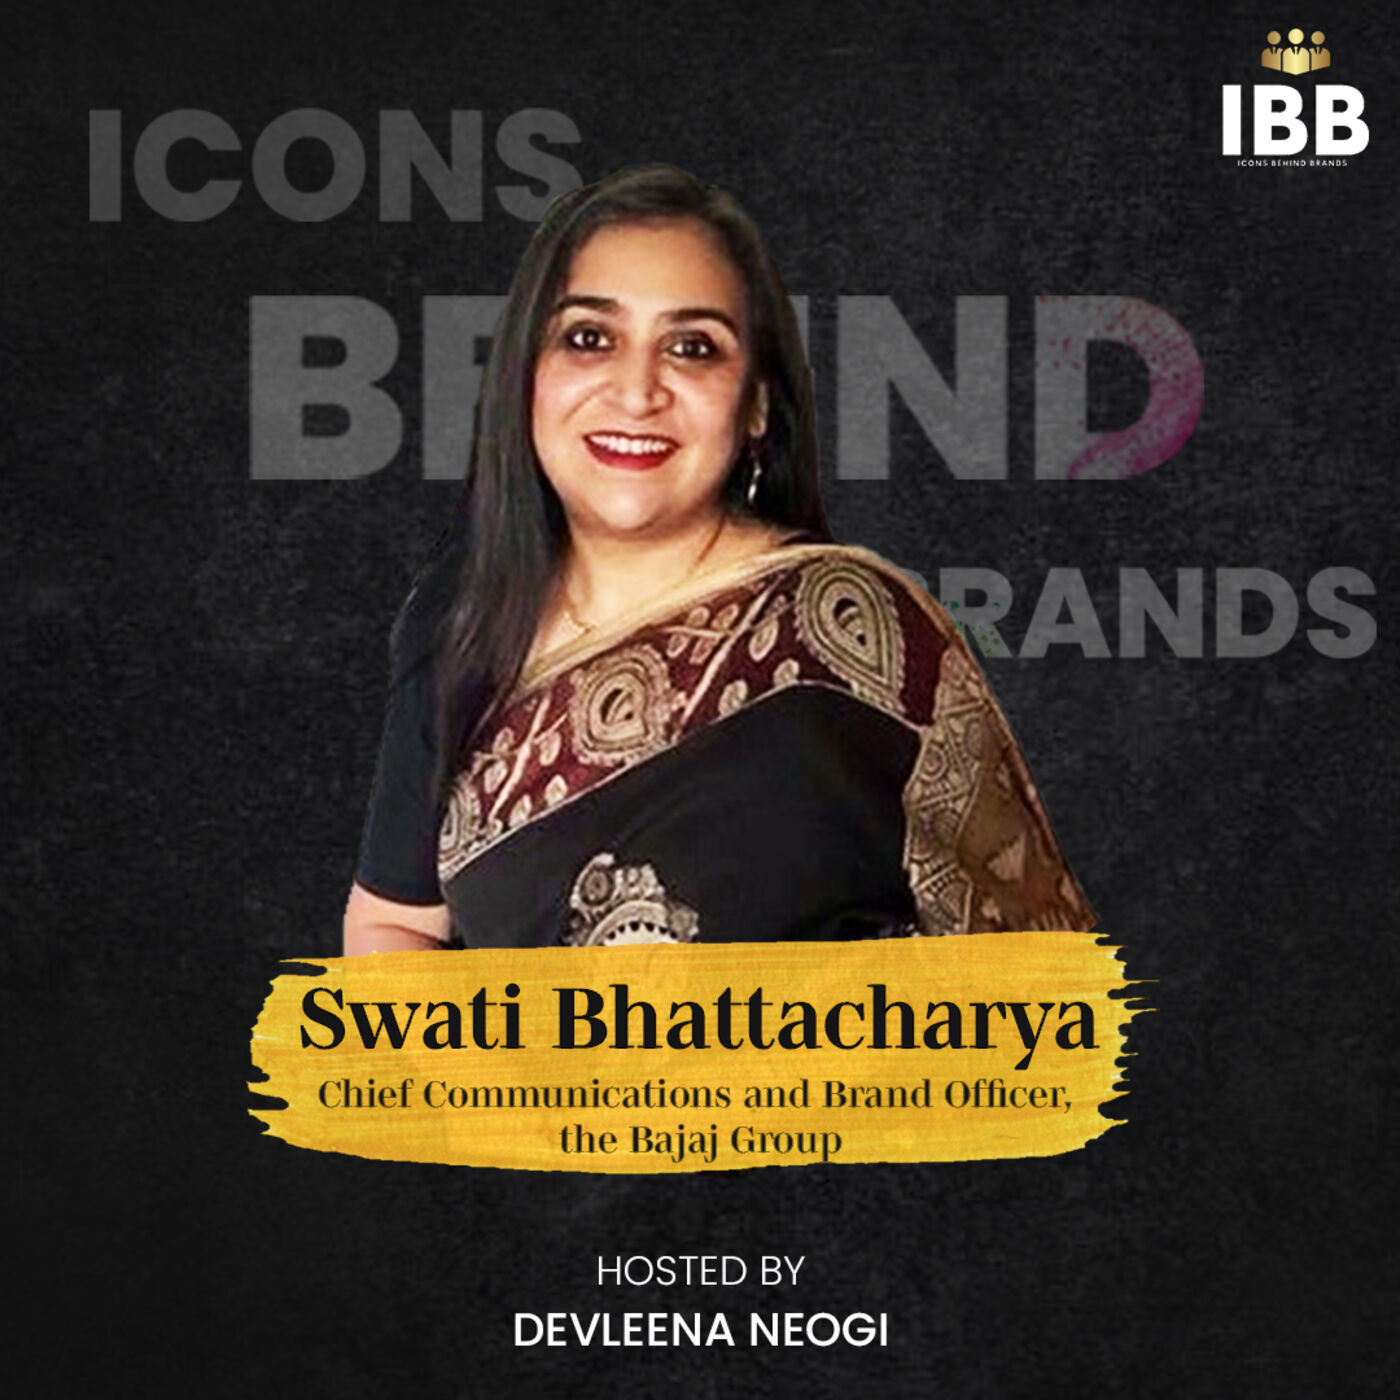 Listen to the most awaited podcast with Swati Bhattacharya on Sunday !